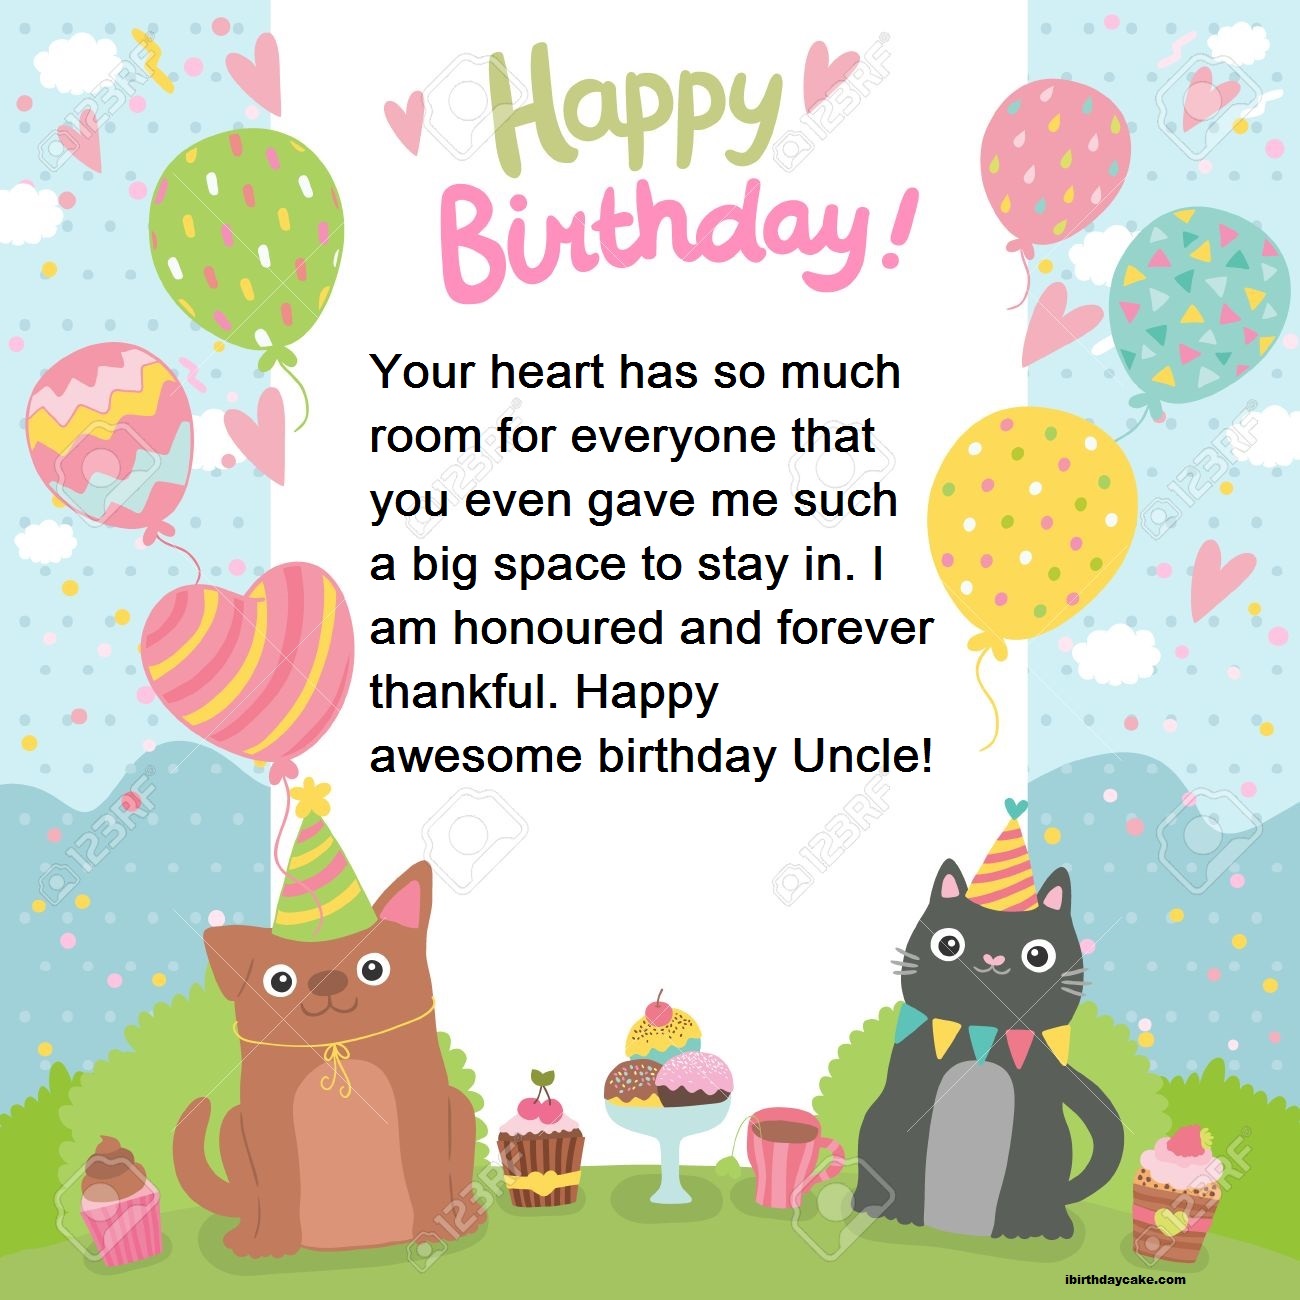 Mauidining: Happy Birthday Uncle Funny Quotes